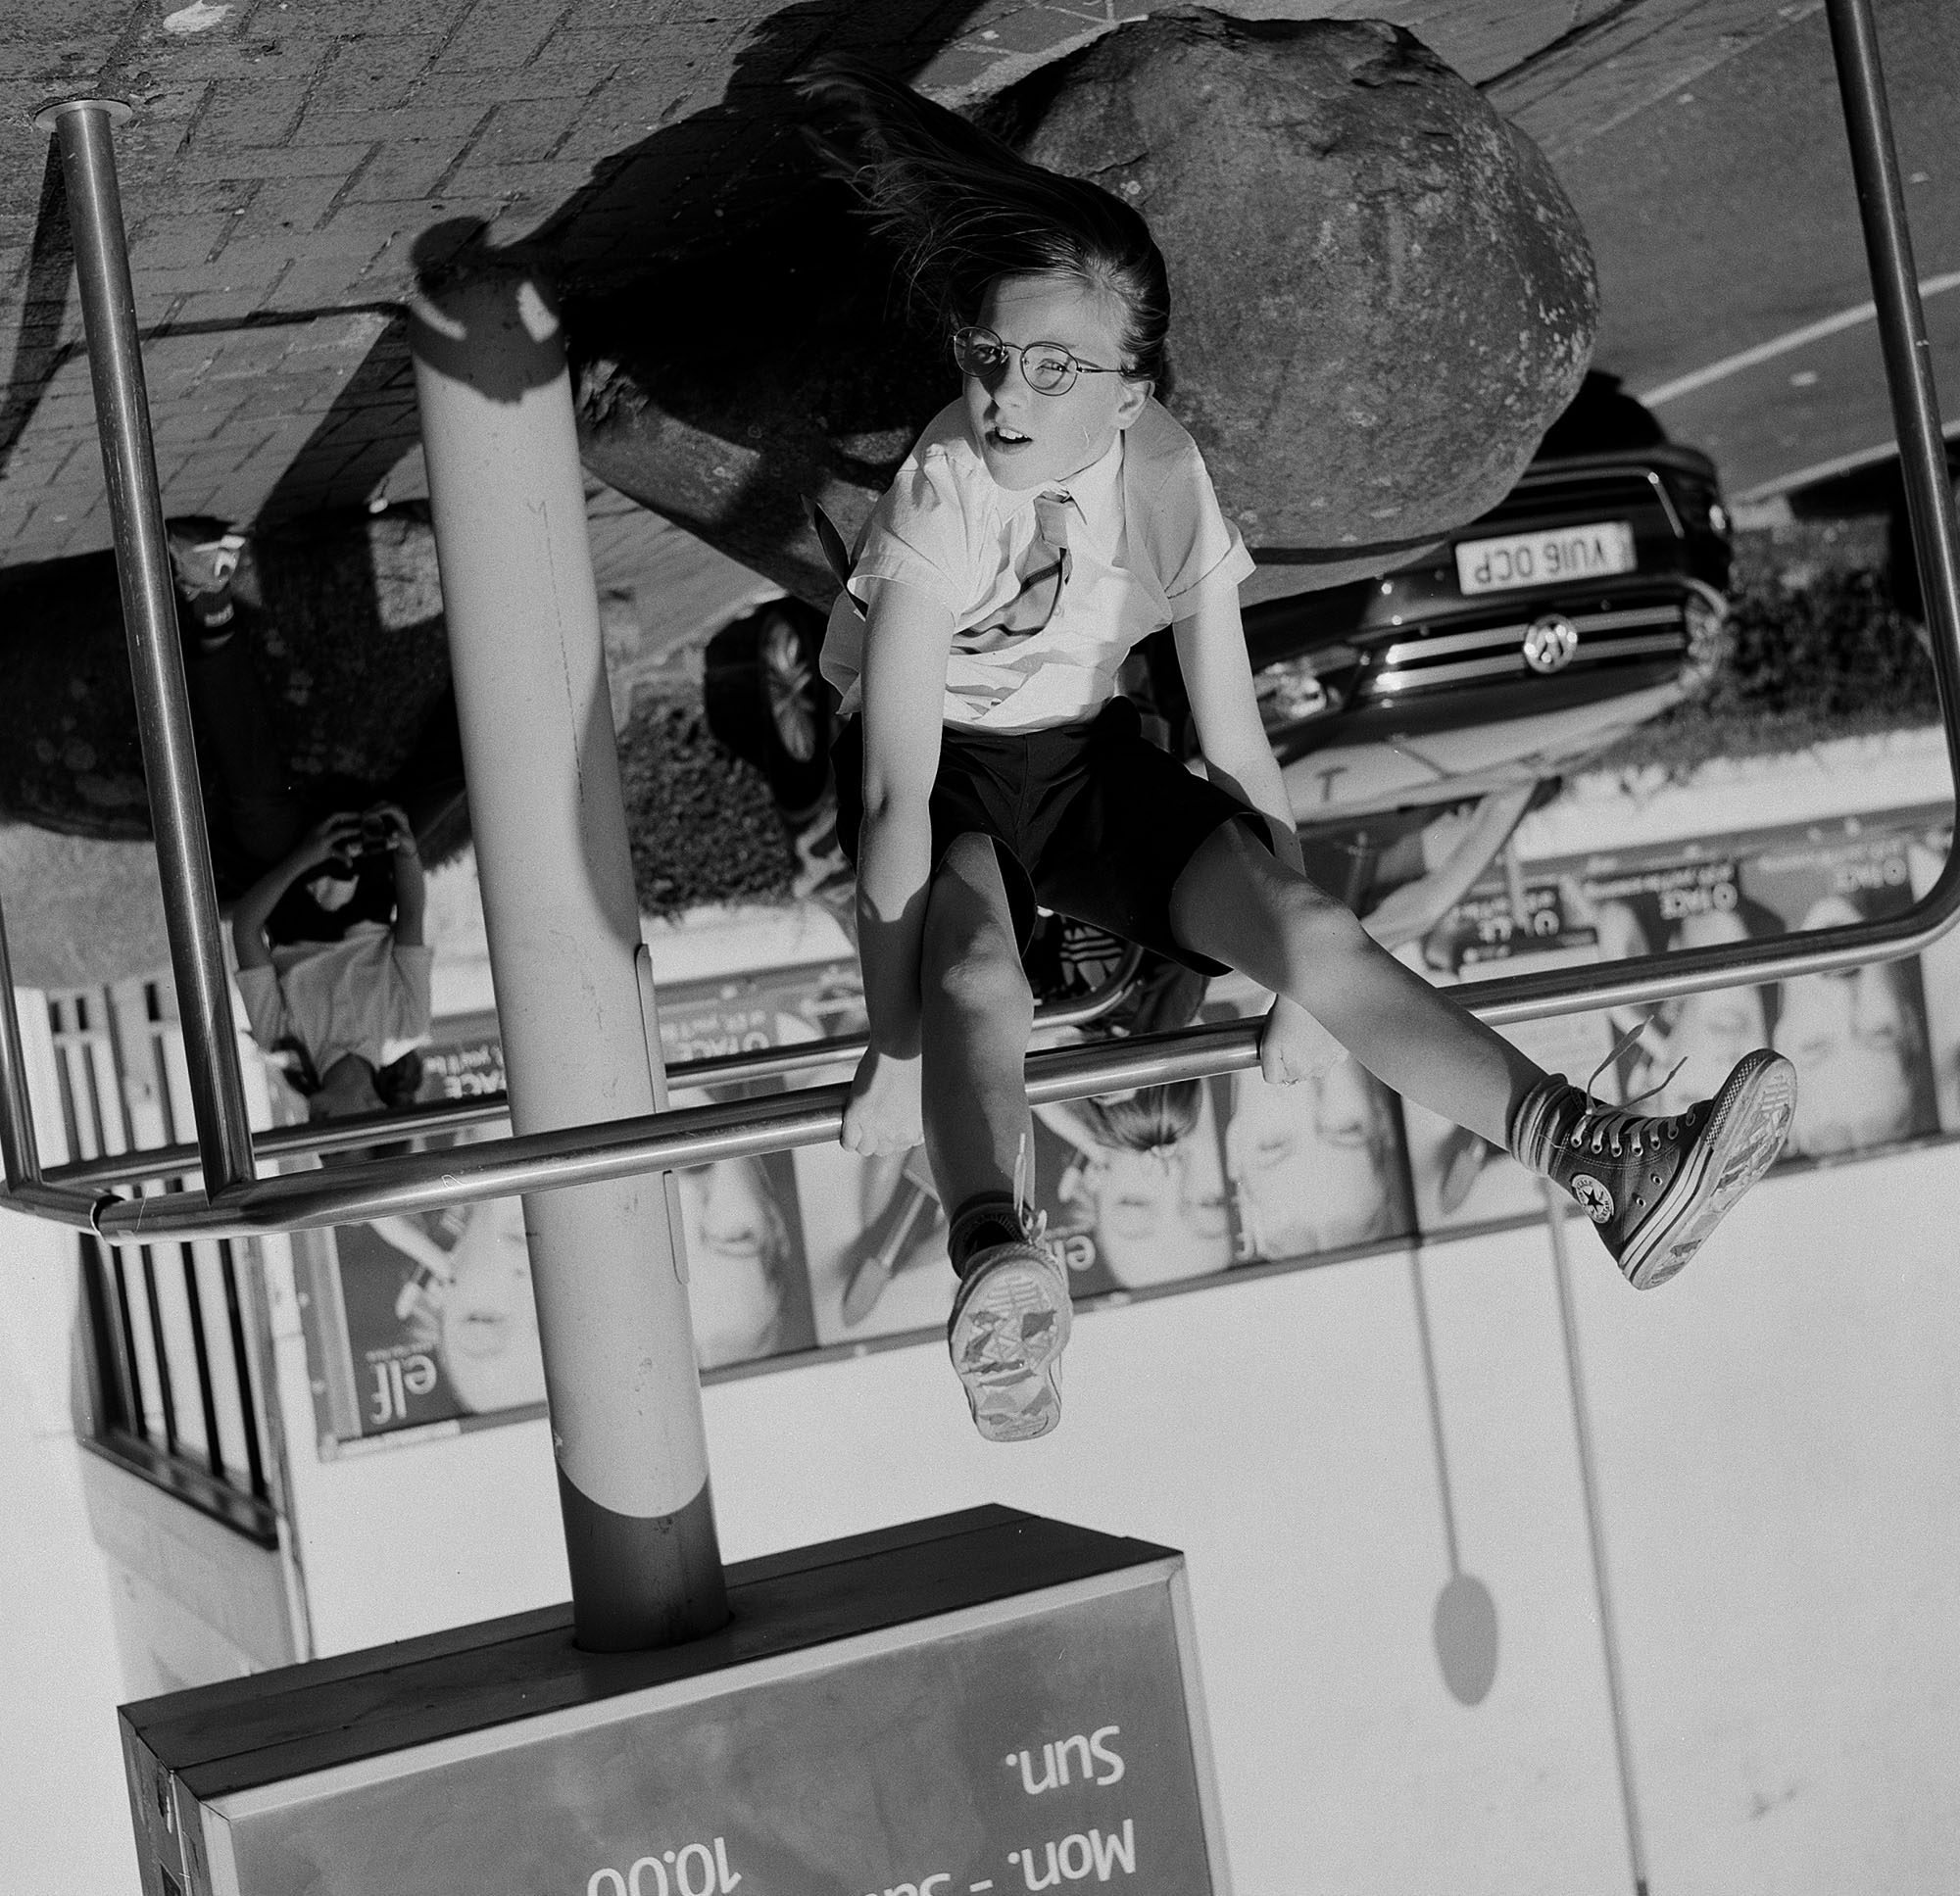 School child in uniform hangs on a metal railing in a retail car park. The image is displayed upside down so that she appears upright while another young person watching from behind appears upside down.